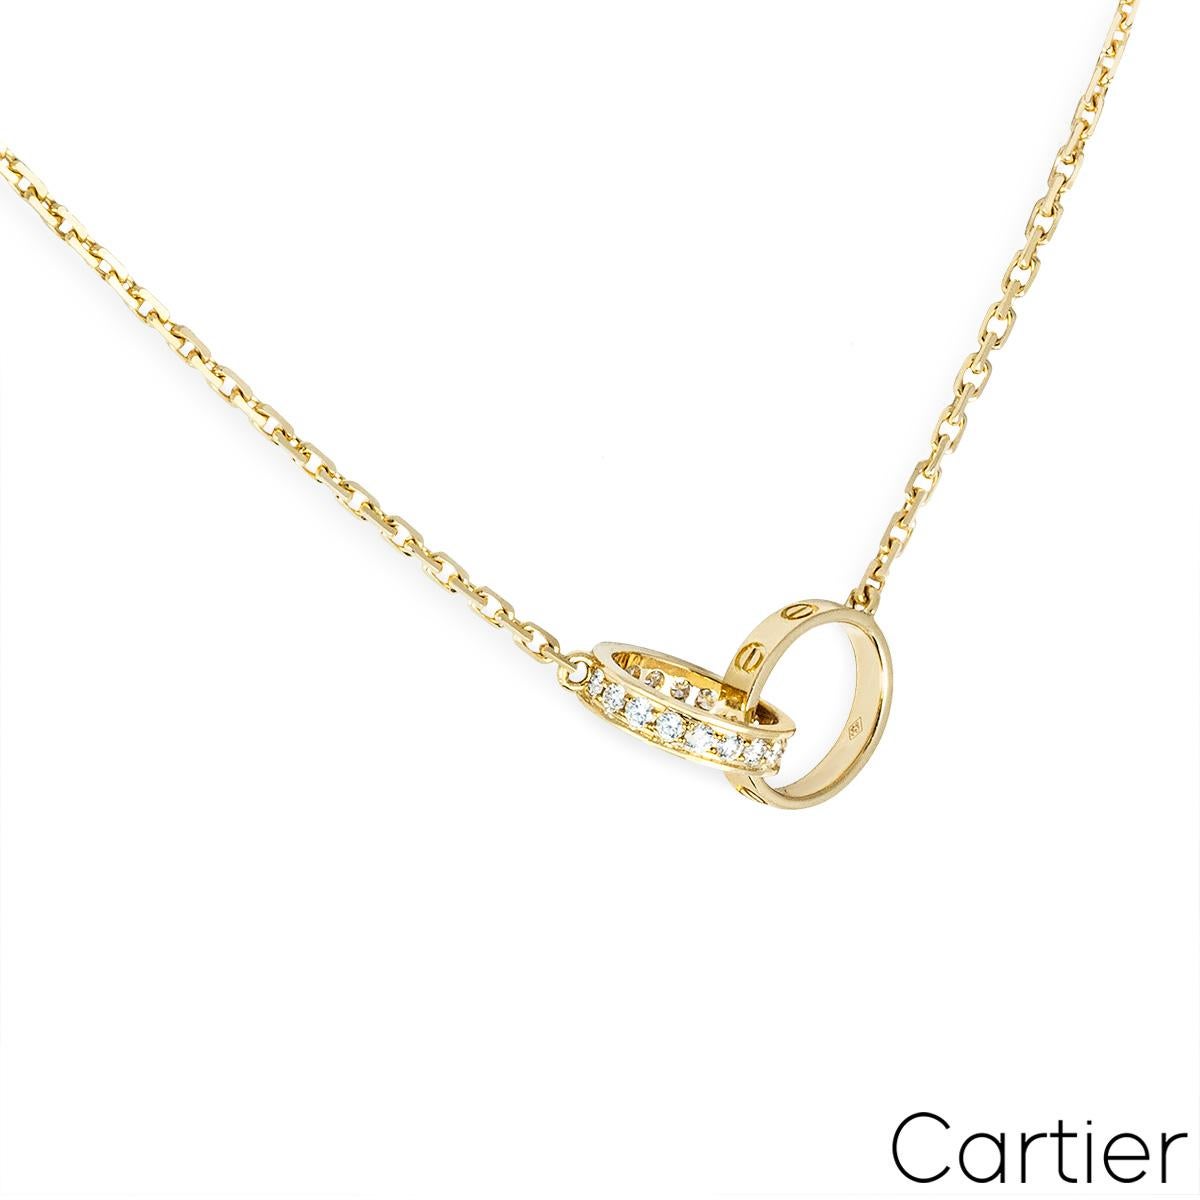 A delicate 18k yellow gold necklace from the Cartier Love collection. The necklace features two interlocking circular motifs set to the centre, one set with the iconic screw motif throughout and the other pave set with 18 round brilliant cut